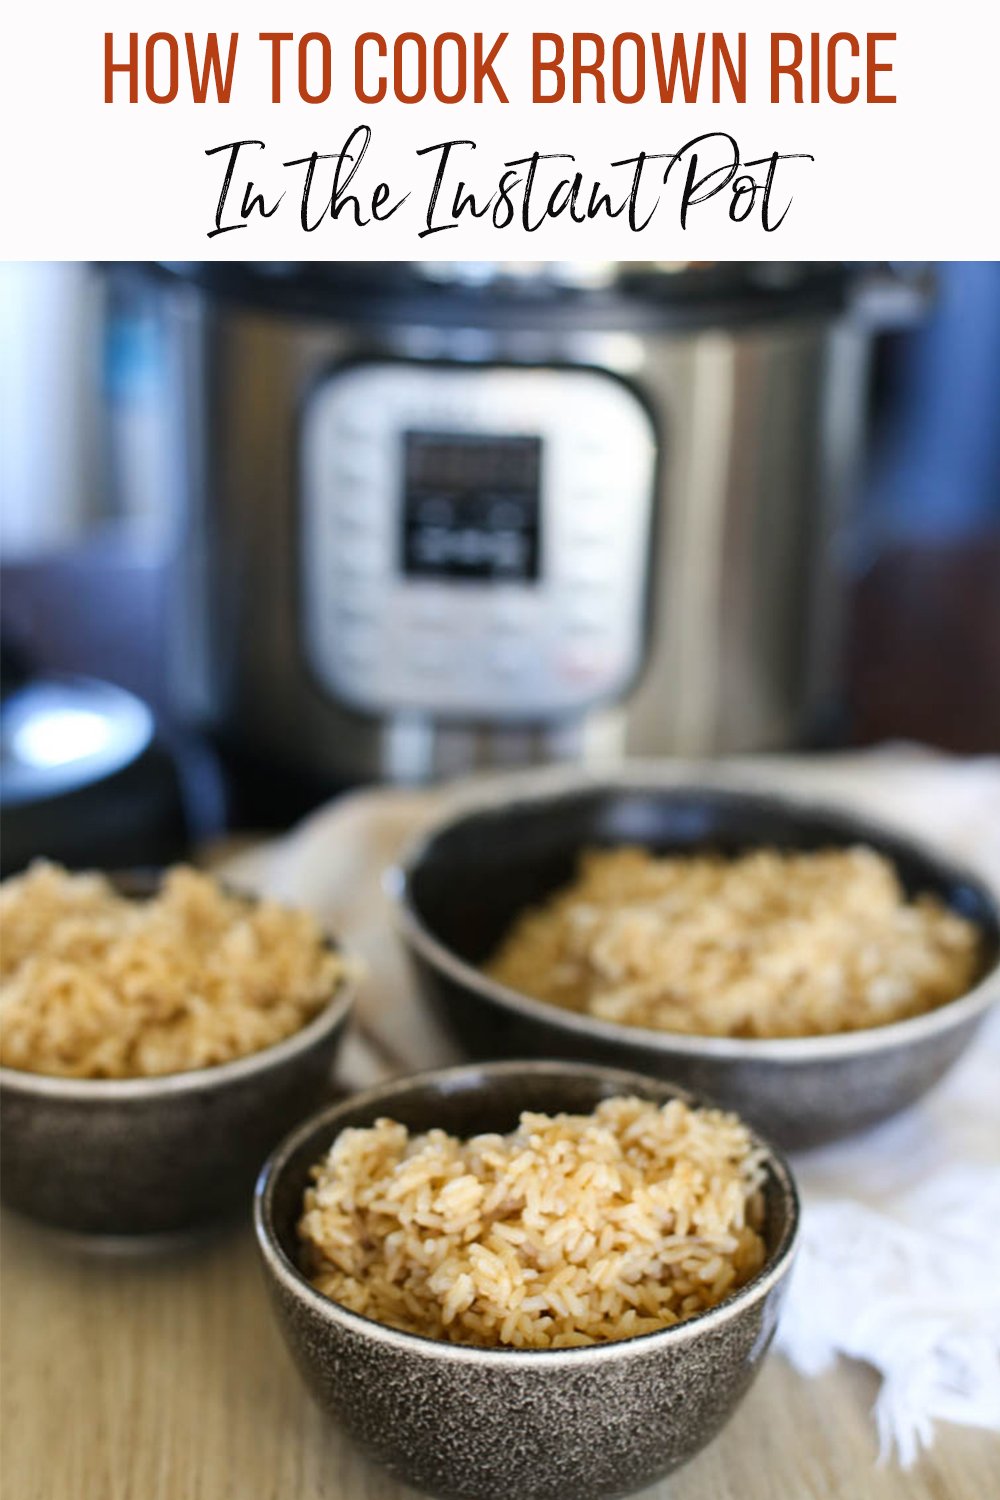 Cooked brown rice in bowls in front of an Instant Pot.